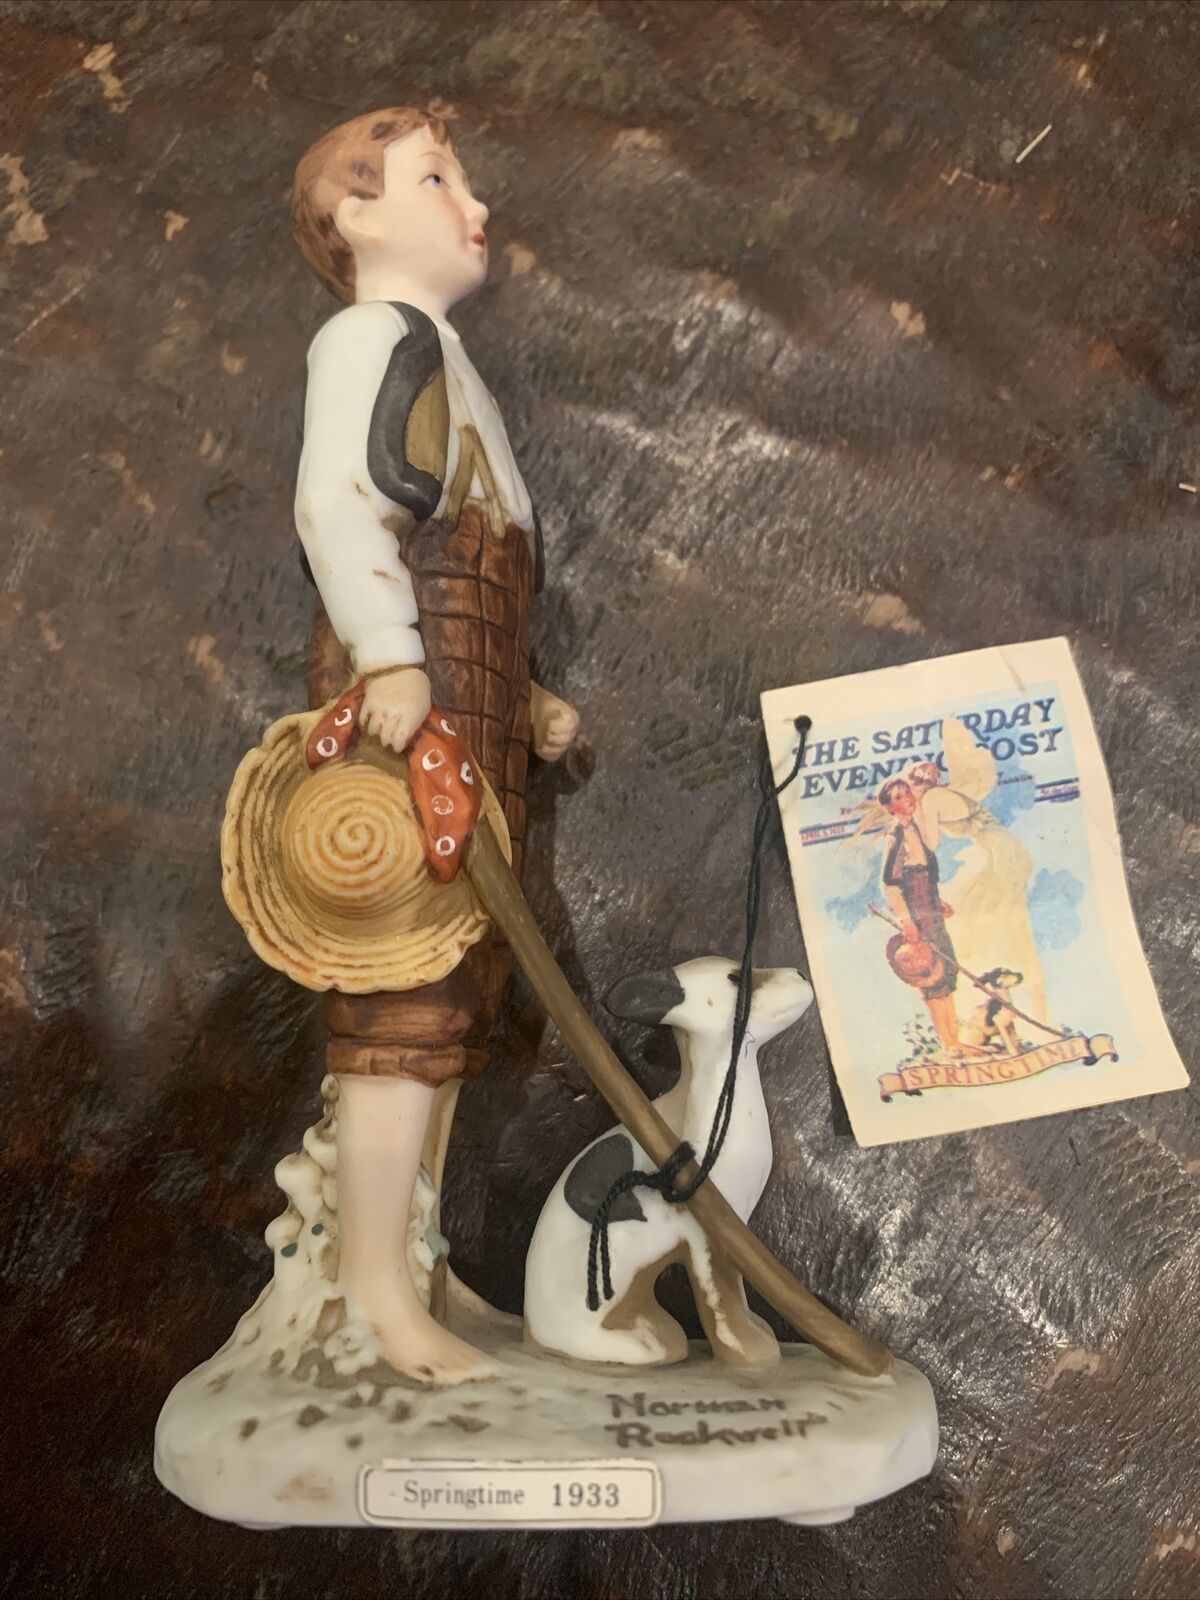 NORMAN ROCKWELL SPRINGTIME 1933 THE SATURDAY EVENING POST CO VINTAGE FIGURINE